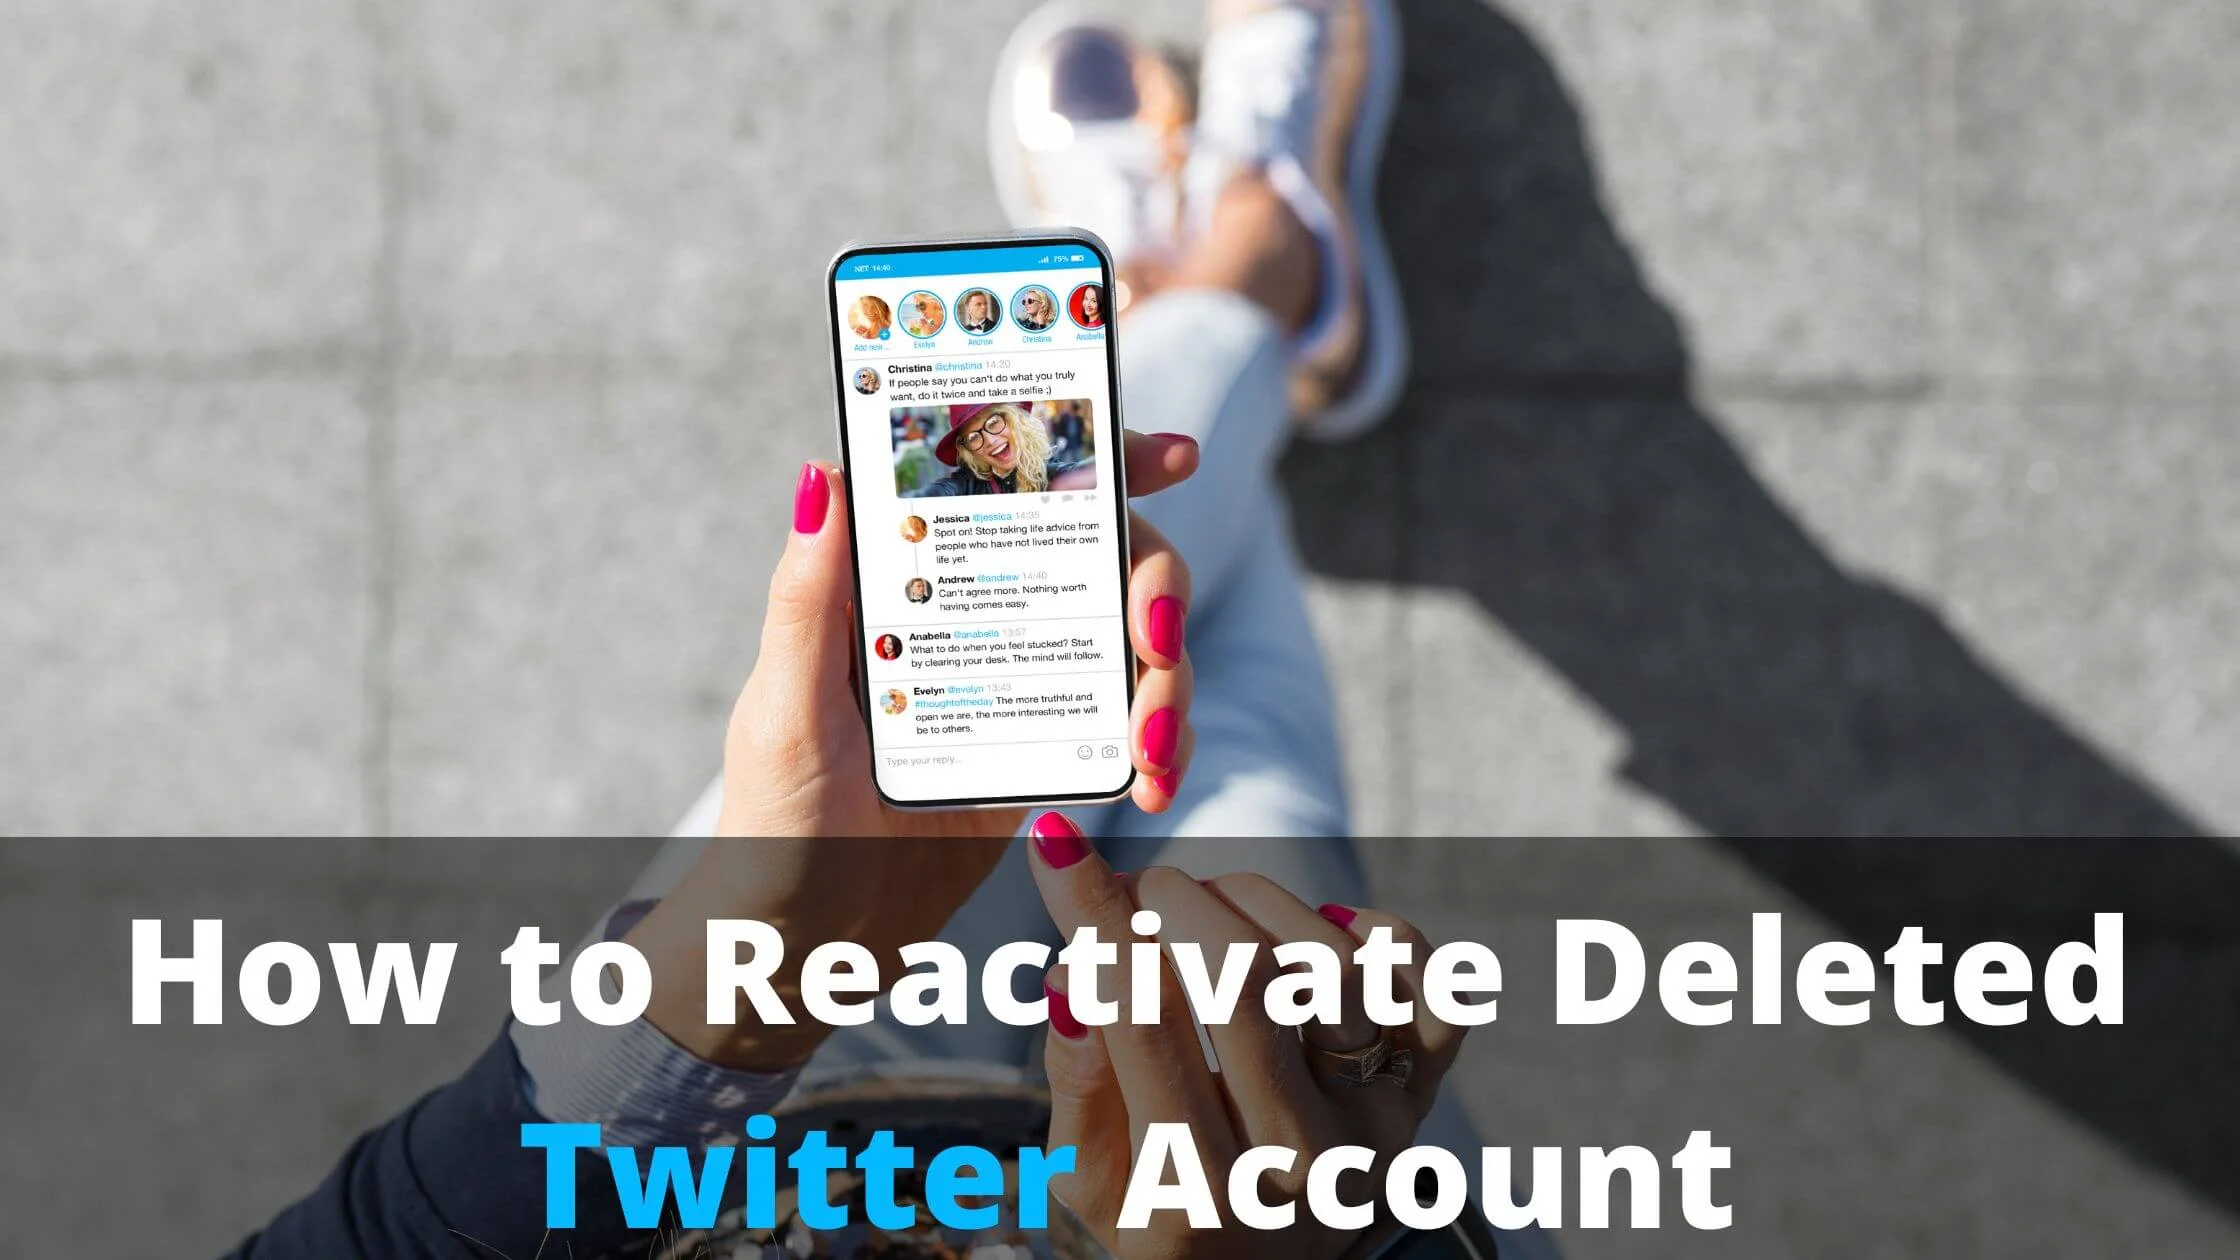 Reactivate Deleted Twitter Account